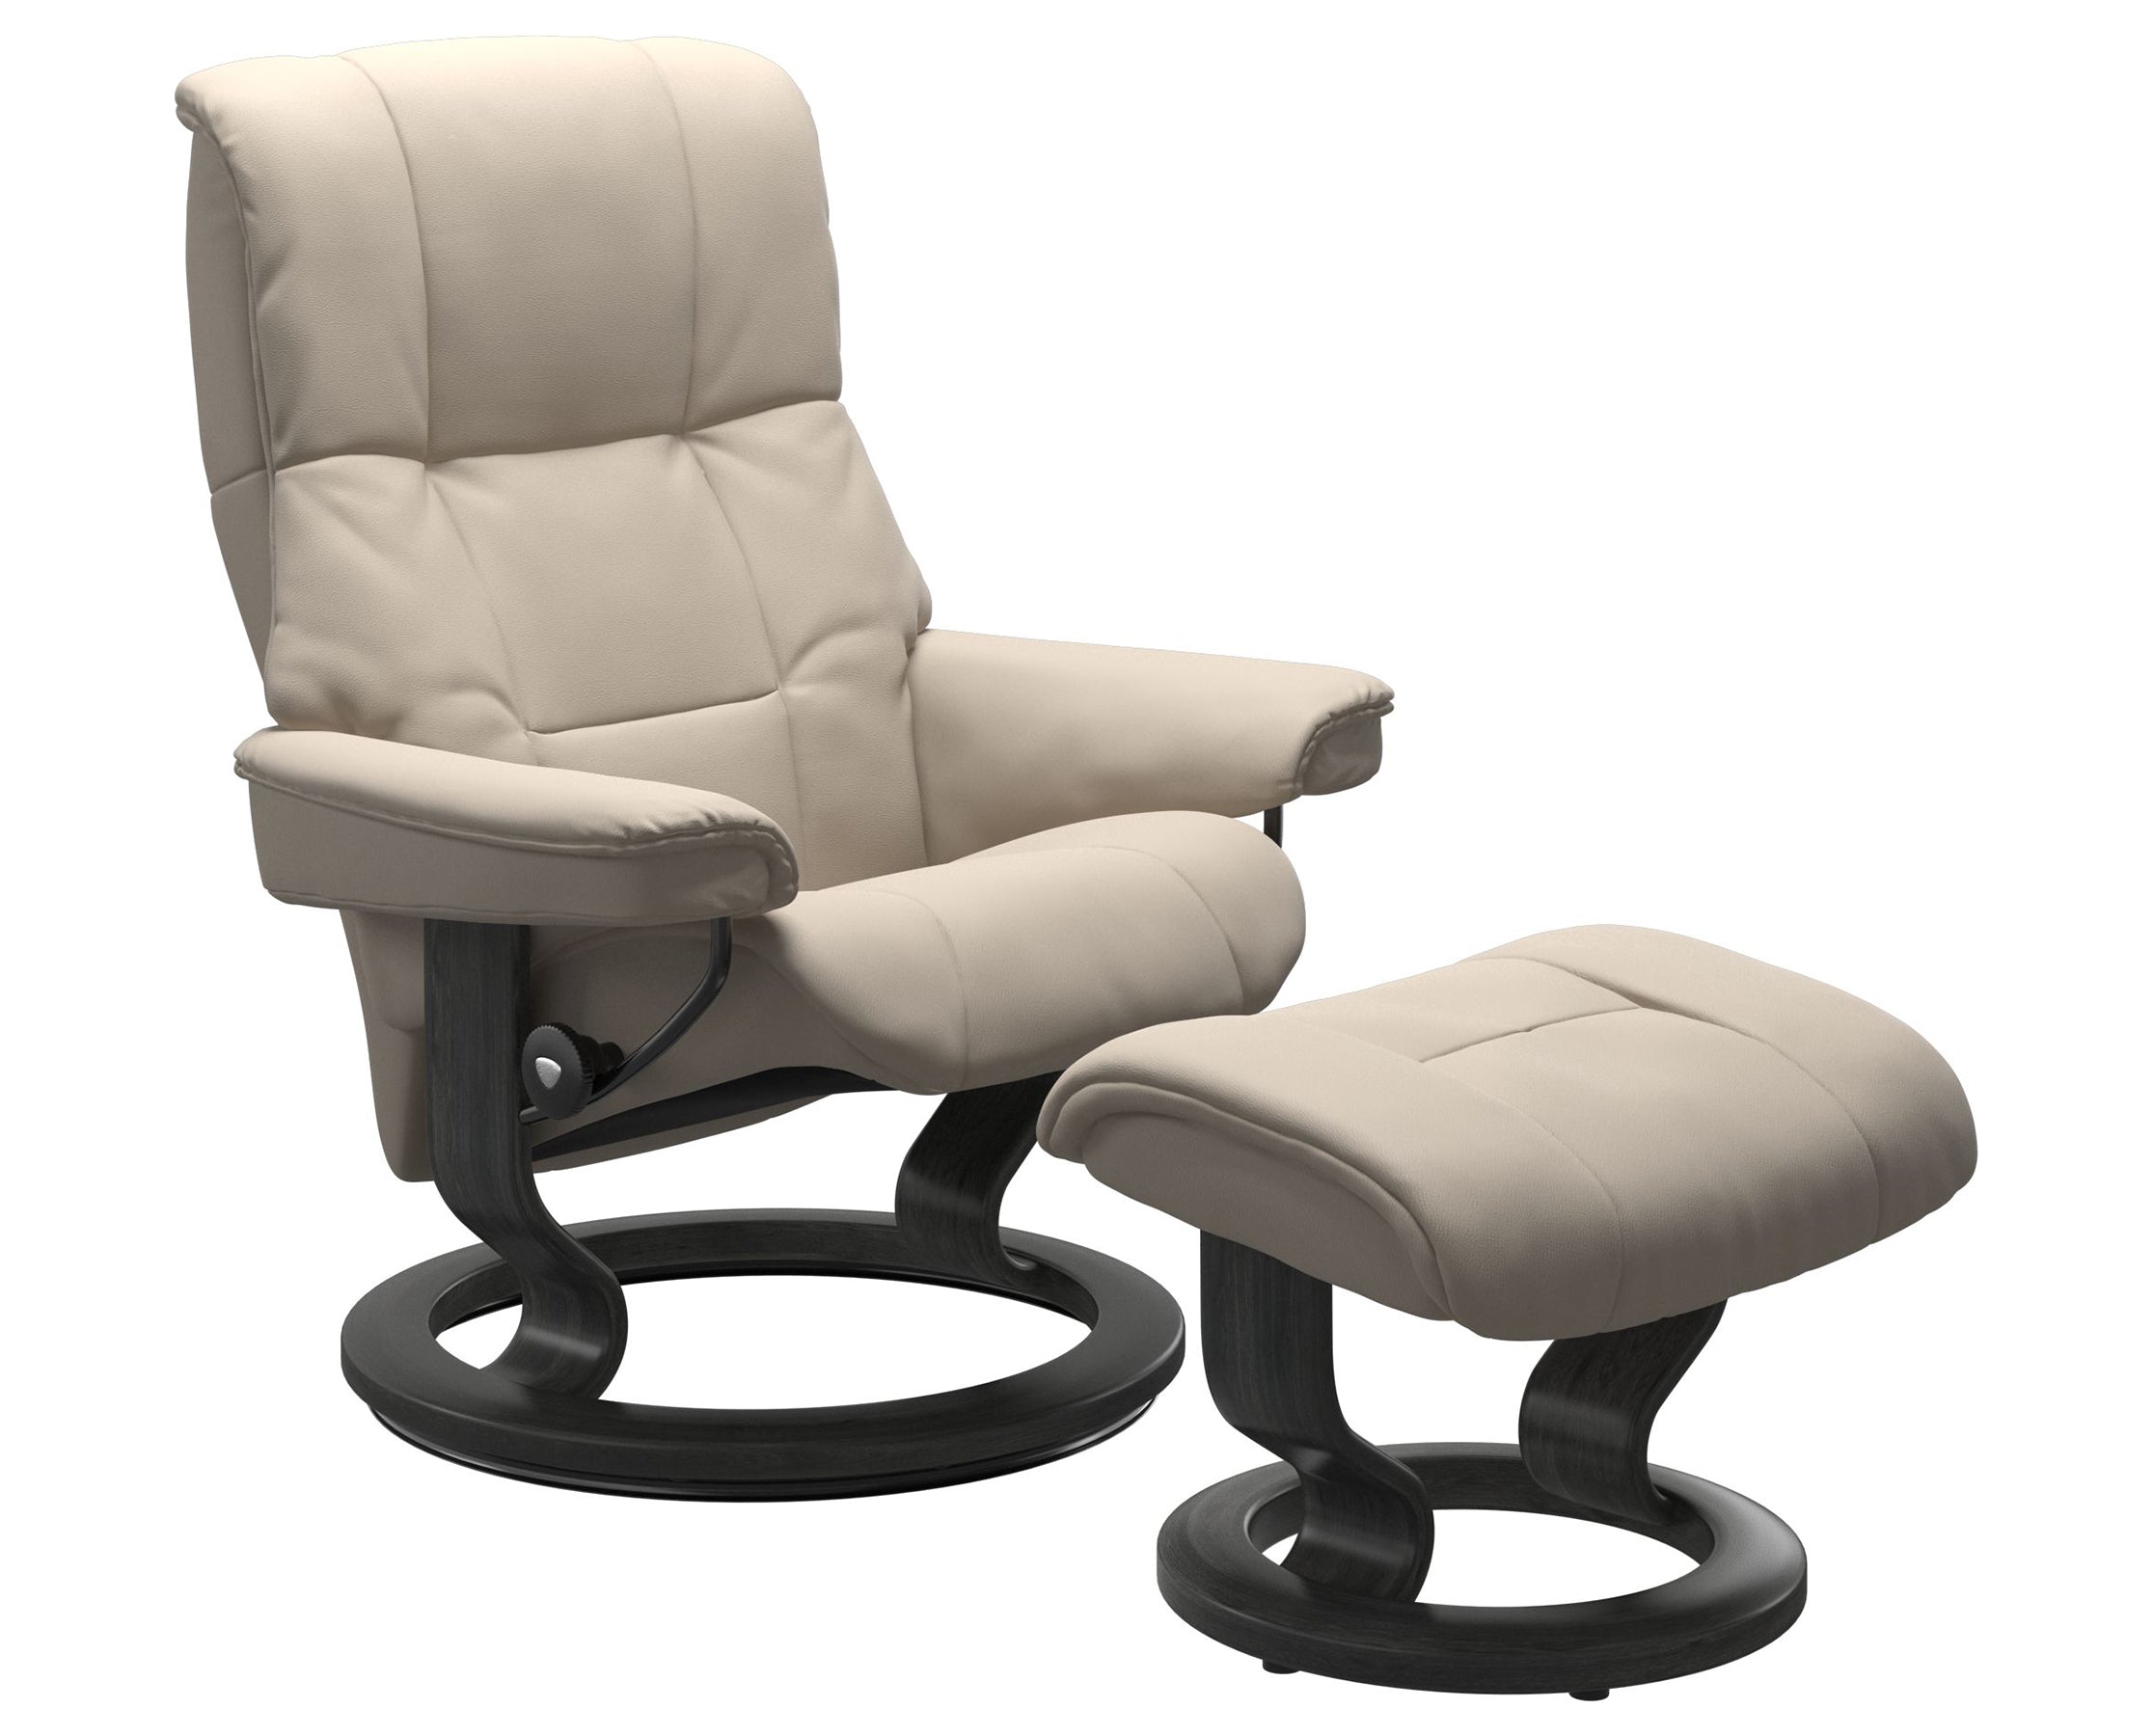 Paloma Leather Fog S/M/L and Grey Base | Stressless Mayfair Classic Recliner | Valley Ridge Furniture